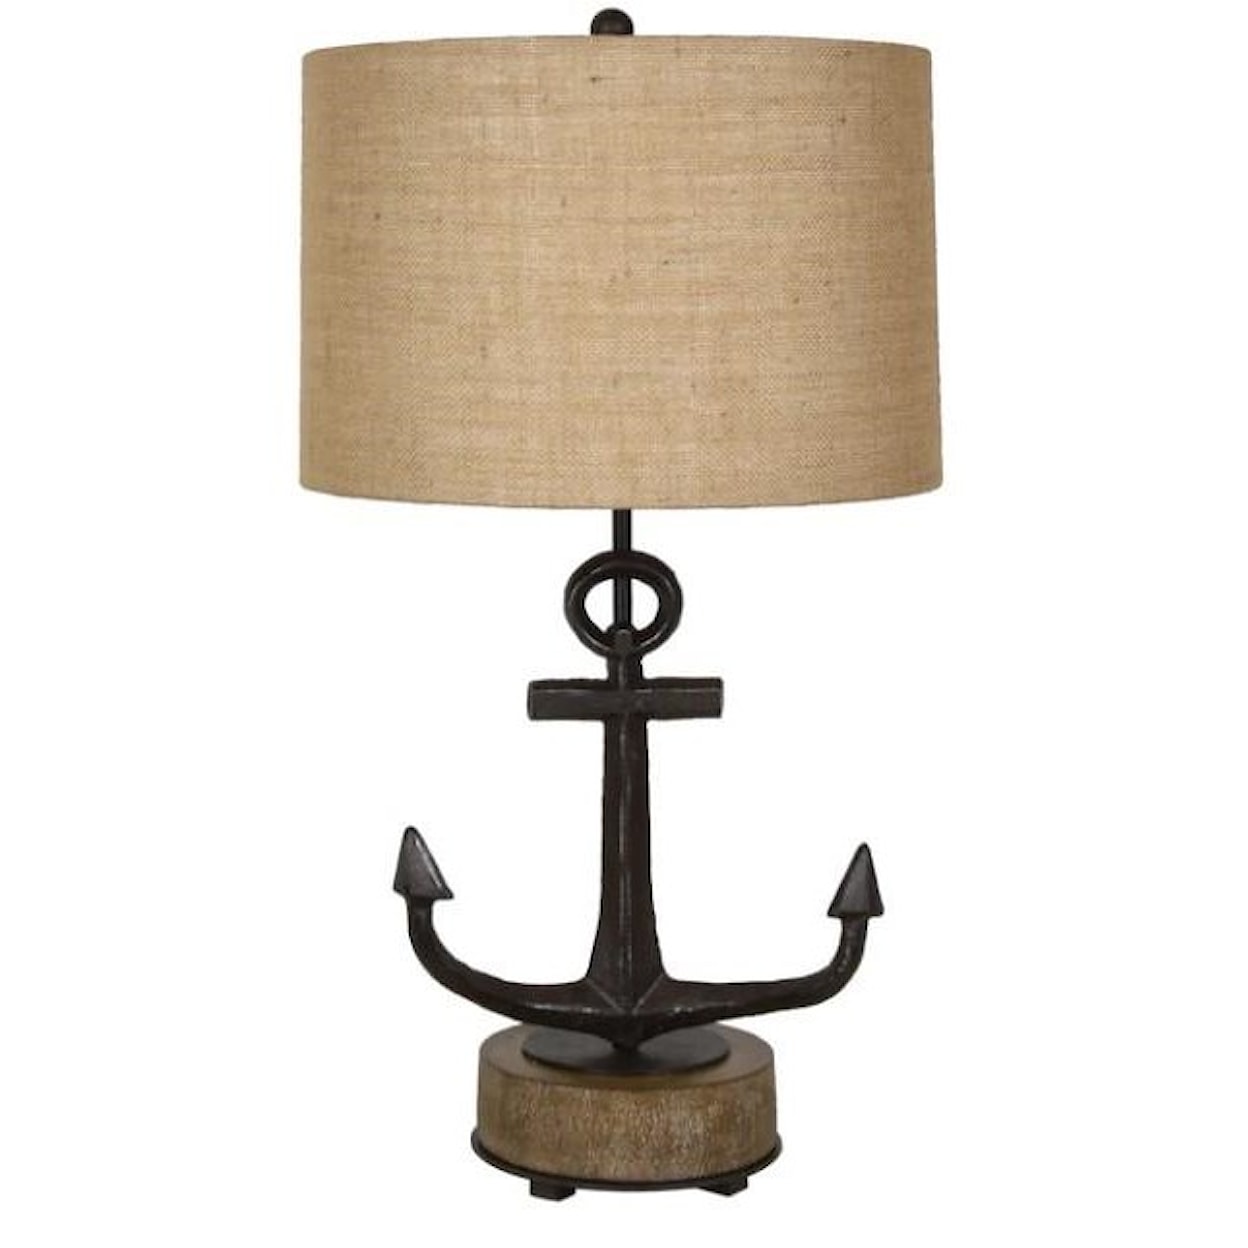 Crestview Collection Lighting Warf Anchor Table Lamp